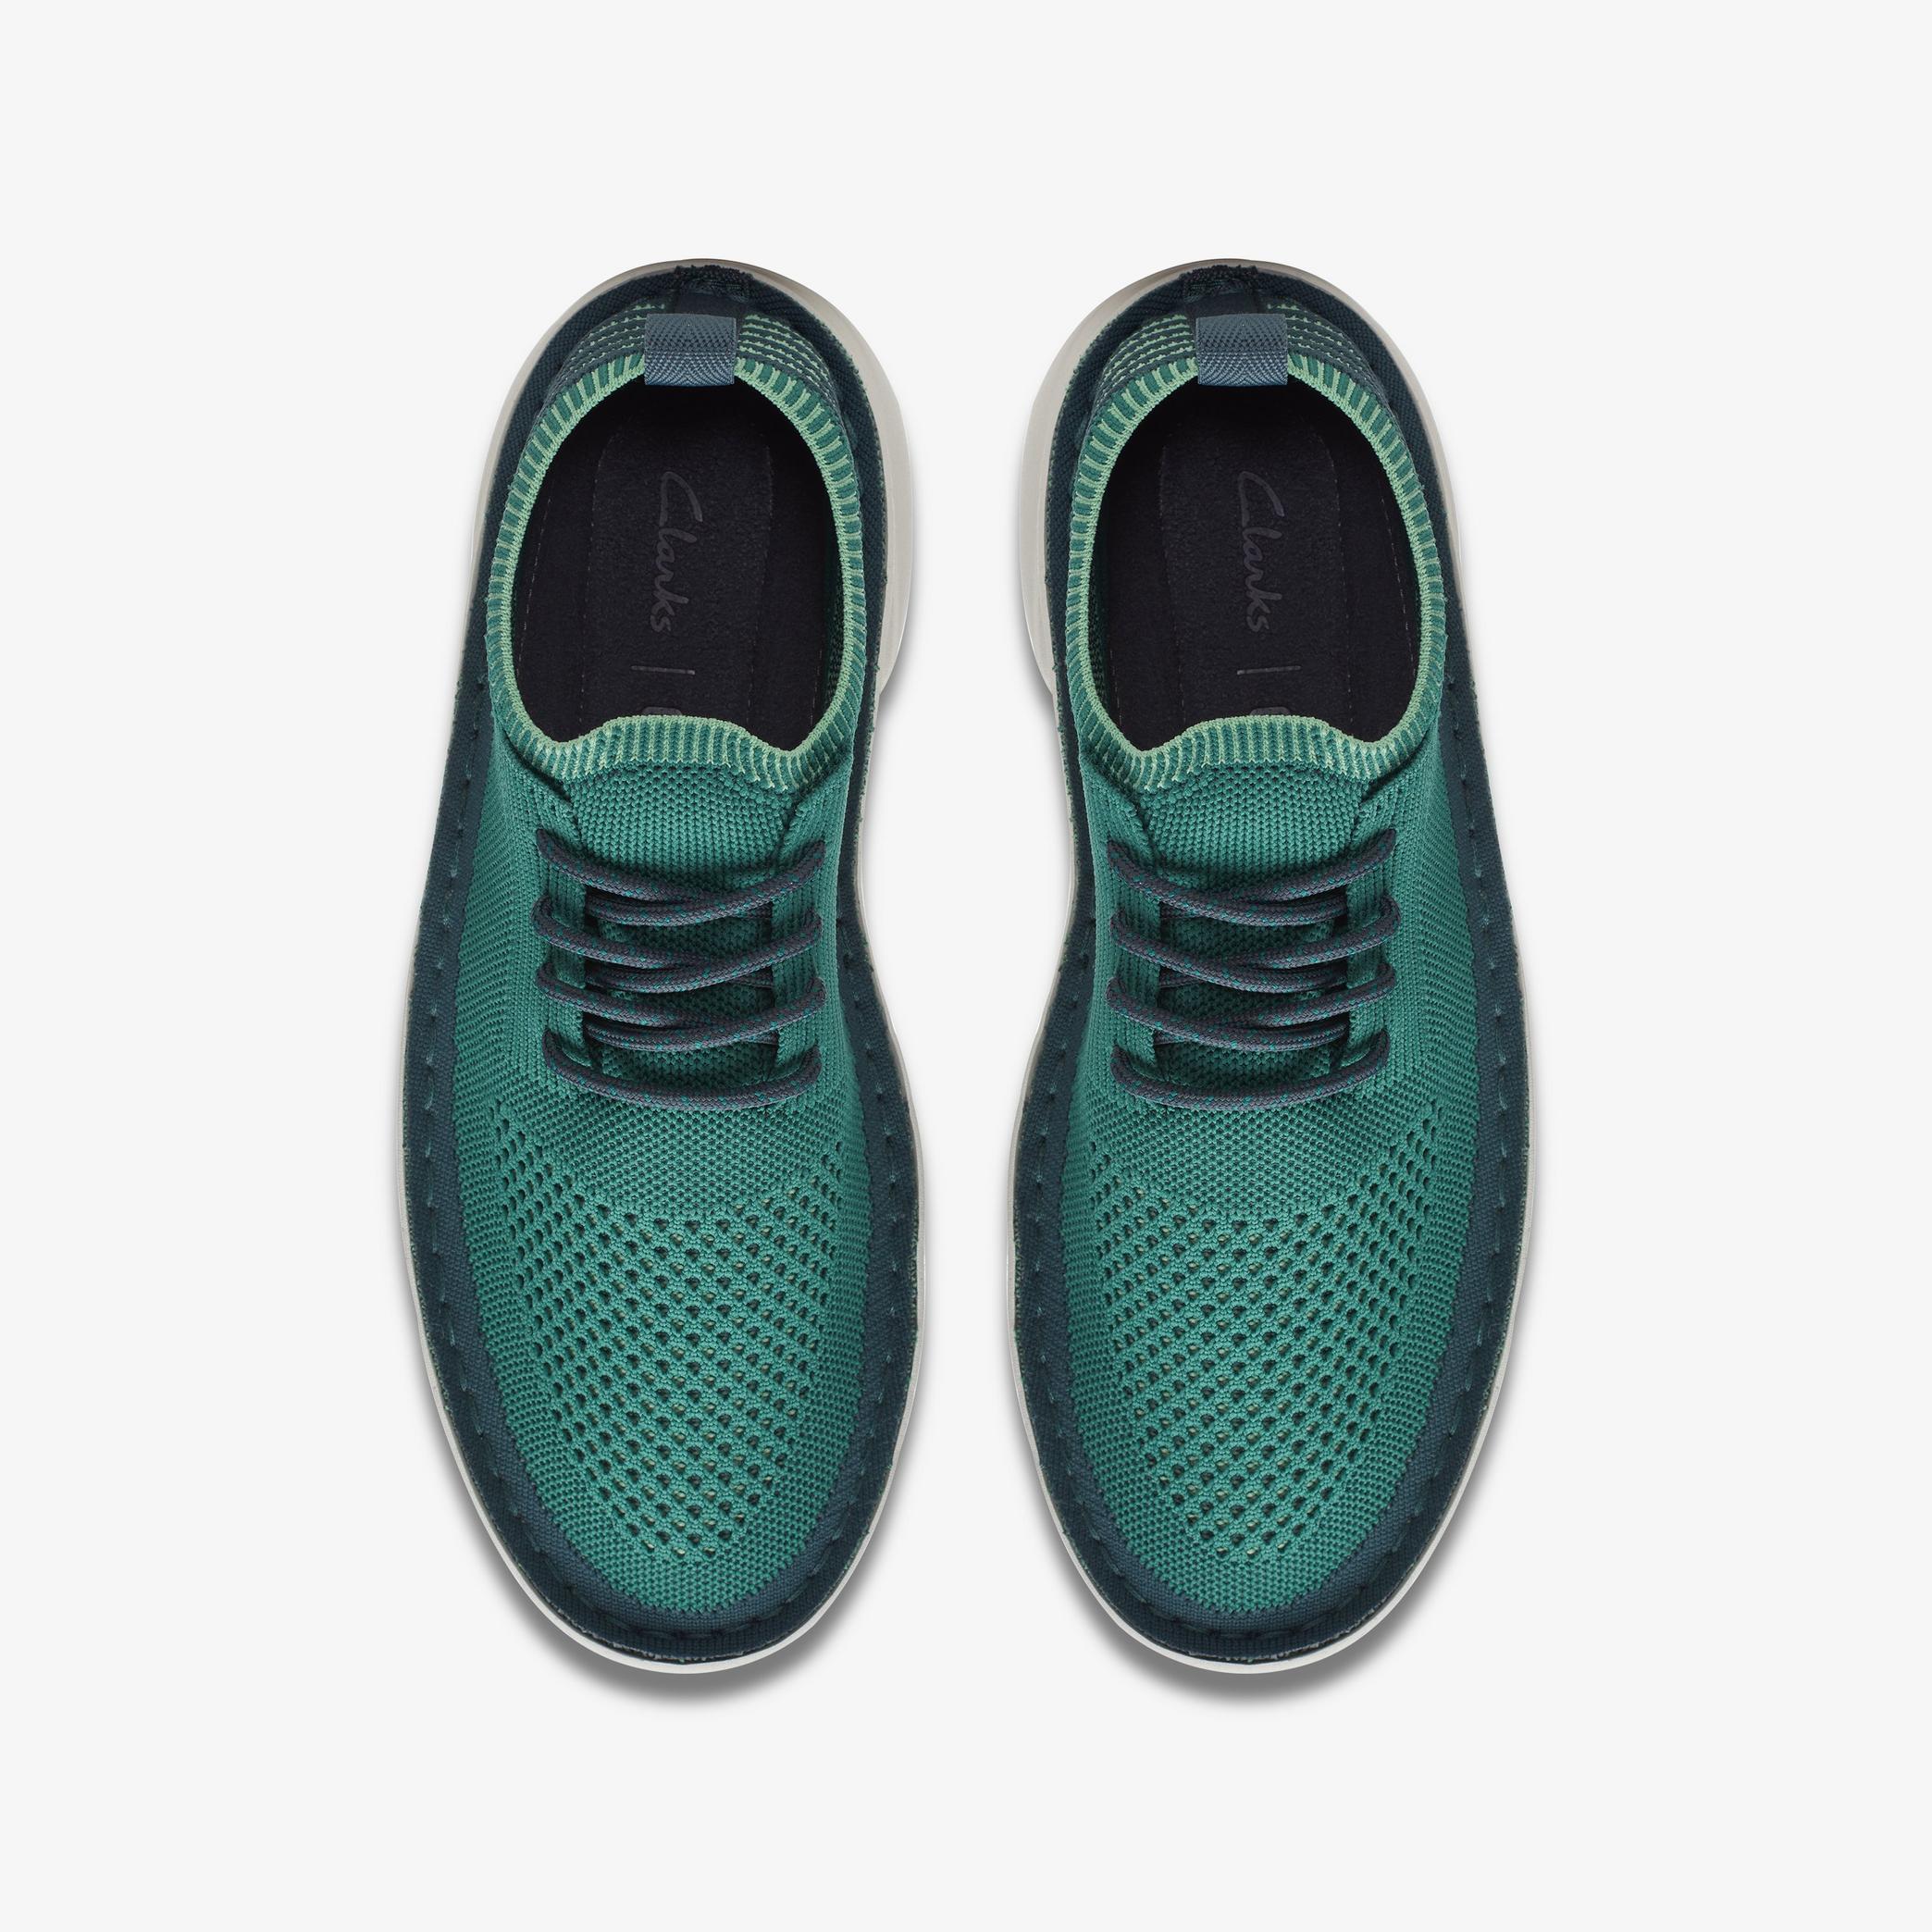 Clarks Origin2 Green Knit Trainers, view 6 of 6